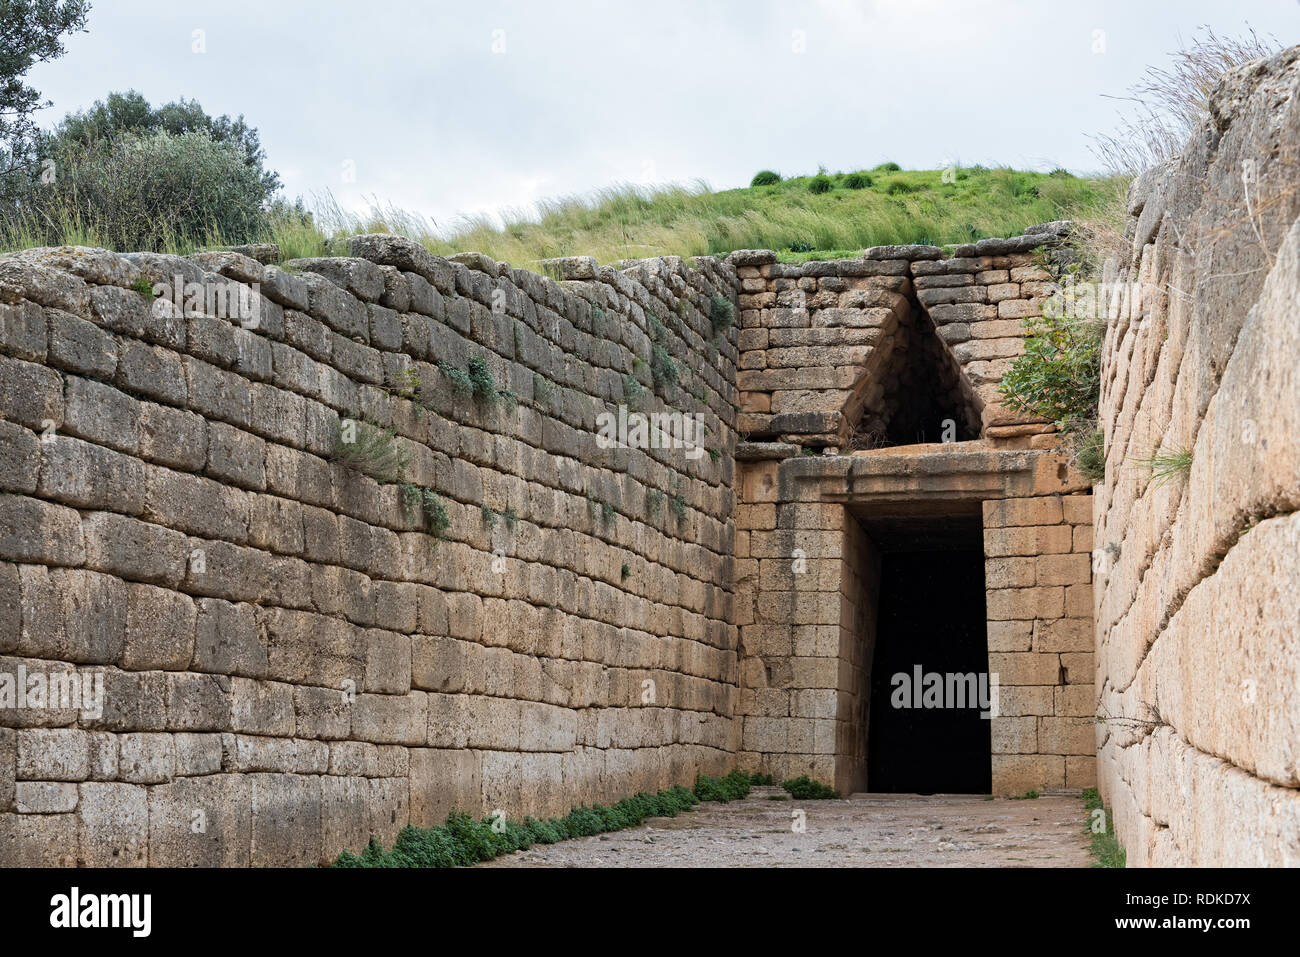 The entrance of the Tholos Tomb of Agamemnon at the archaeological site of Mycenae in Peloponnese, Greece Stock Photo